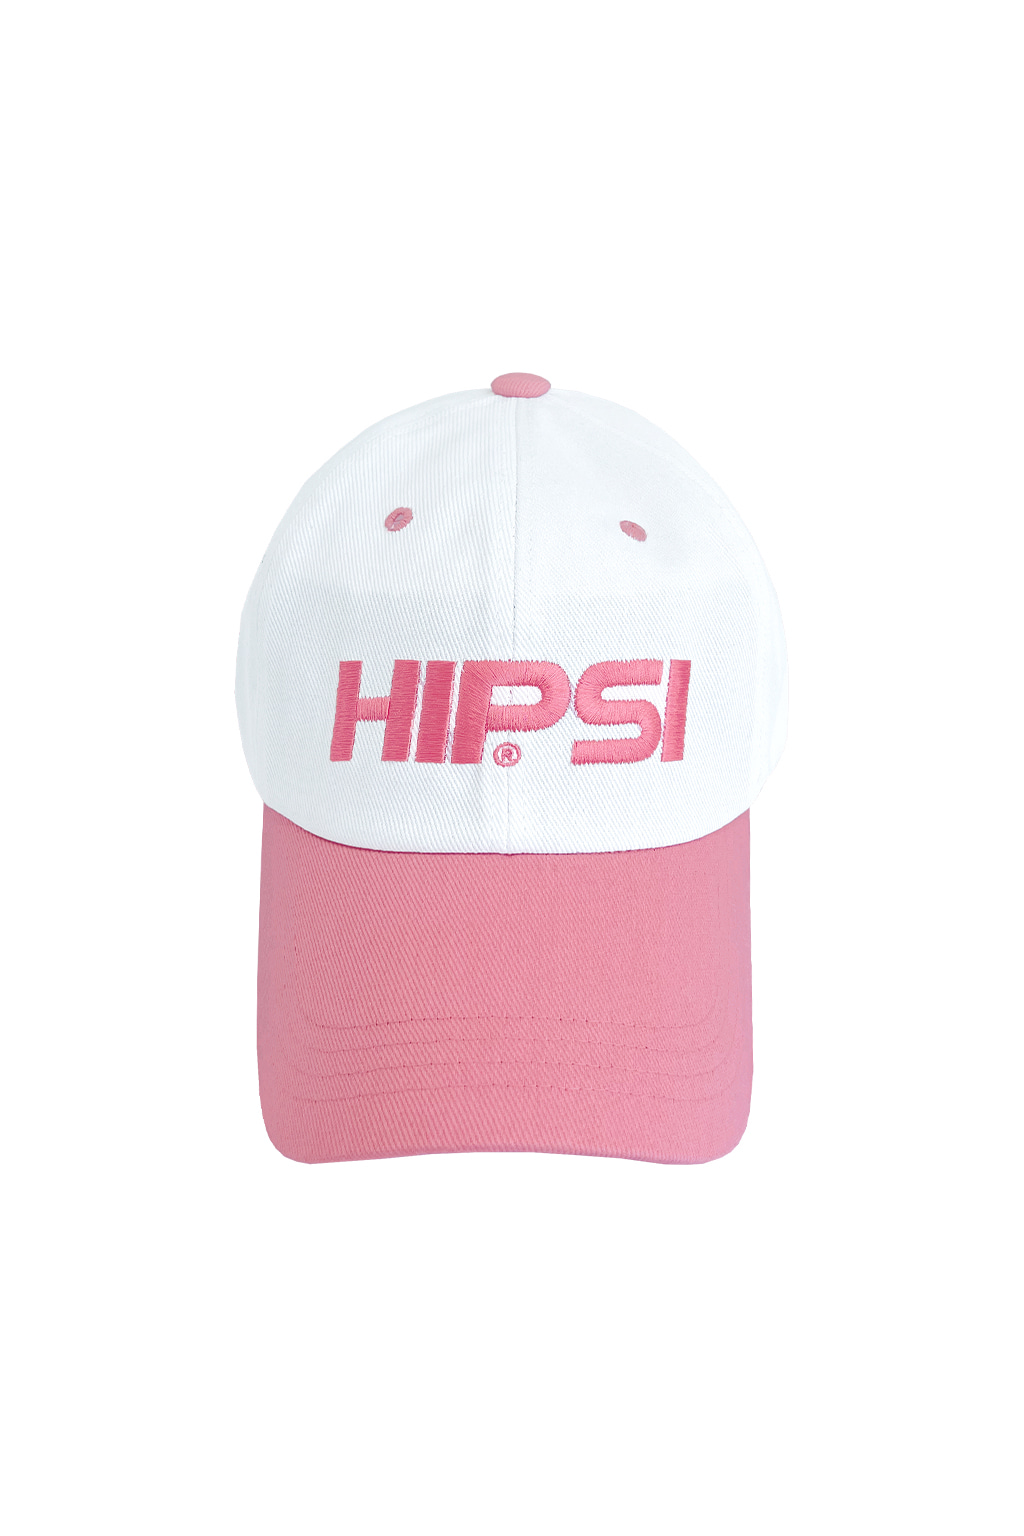 Hipsy color matching ball cap strawberry pink